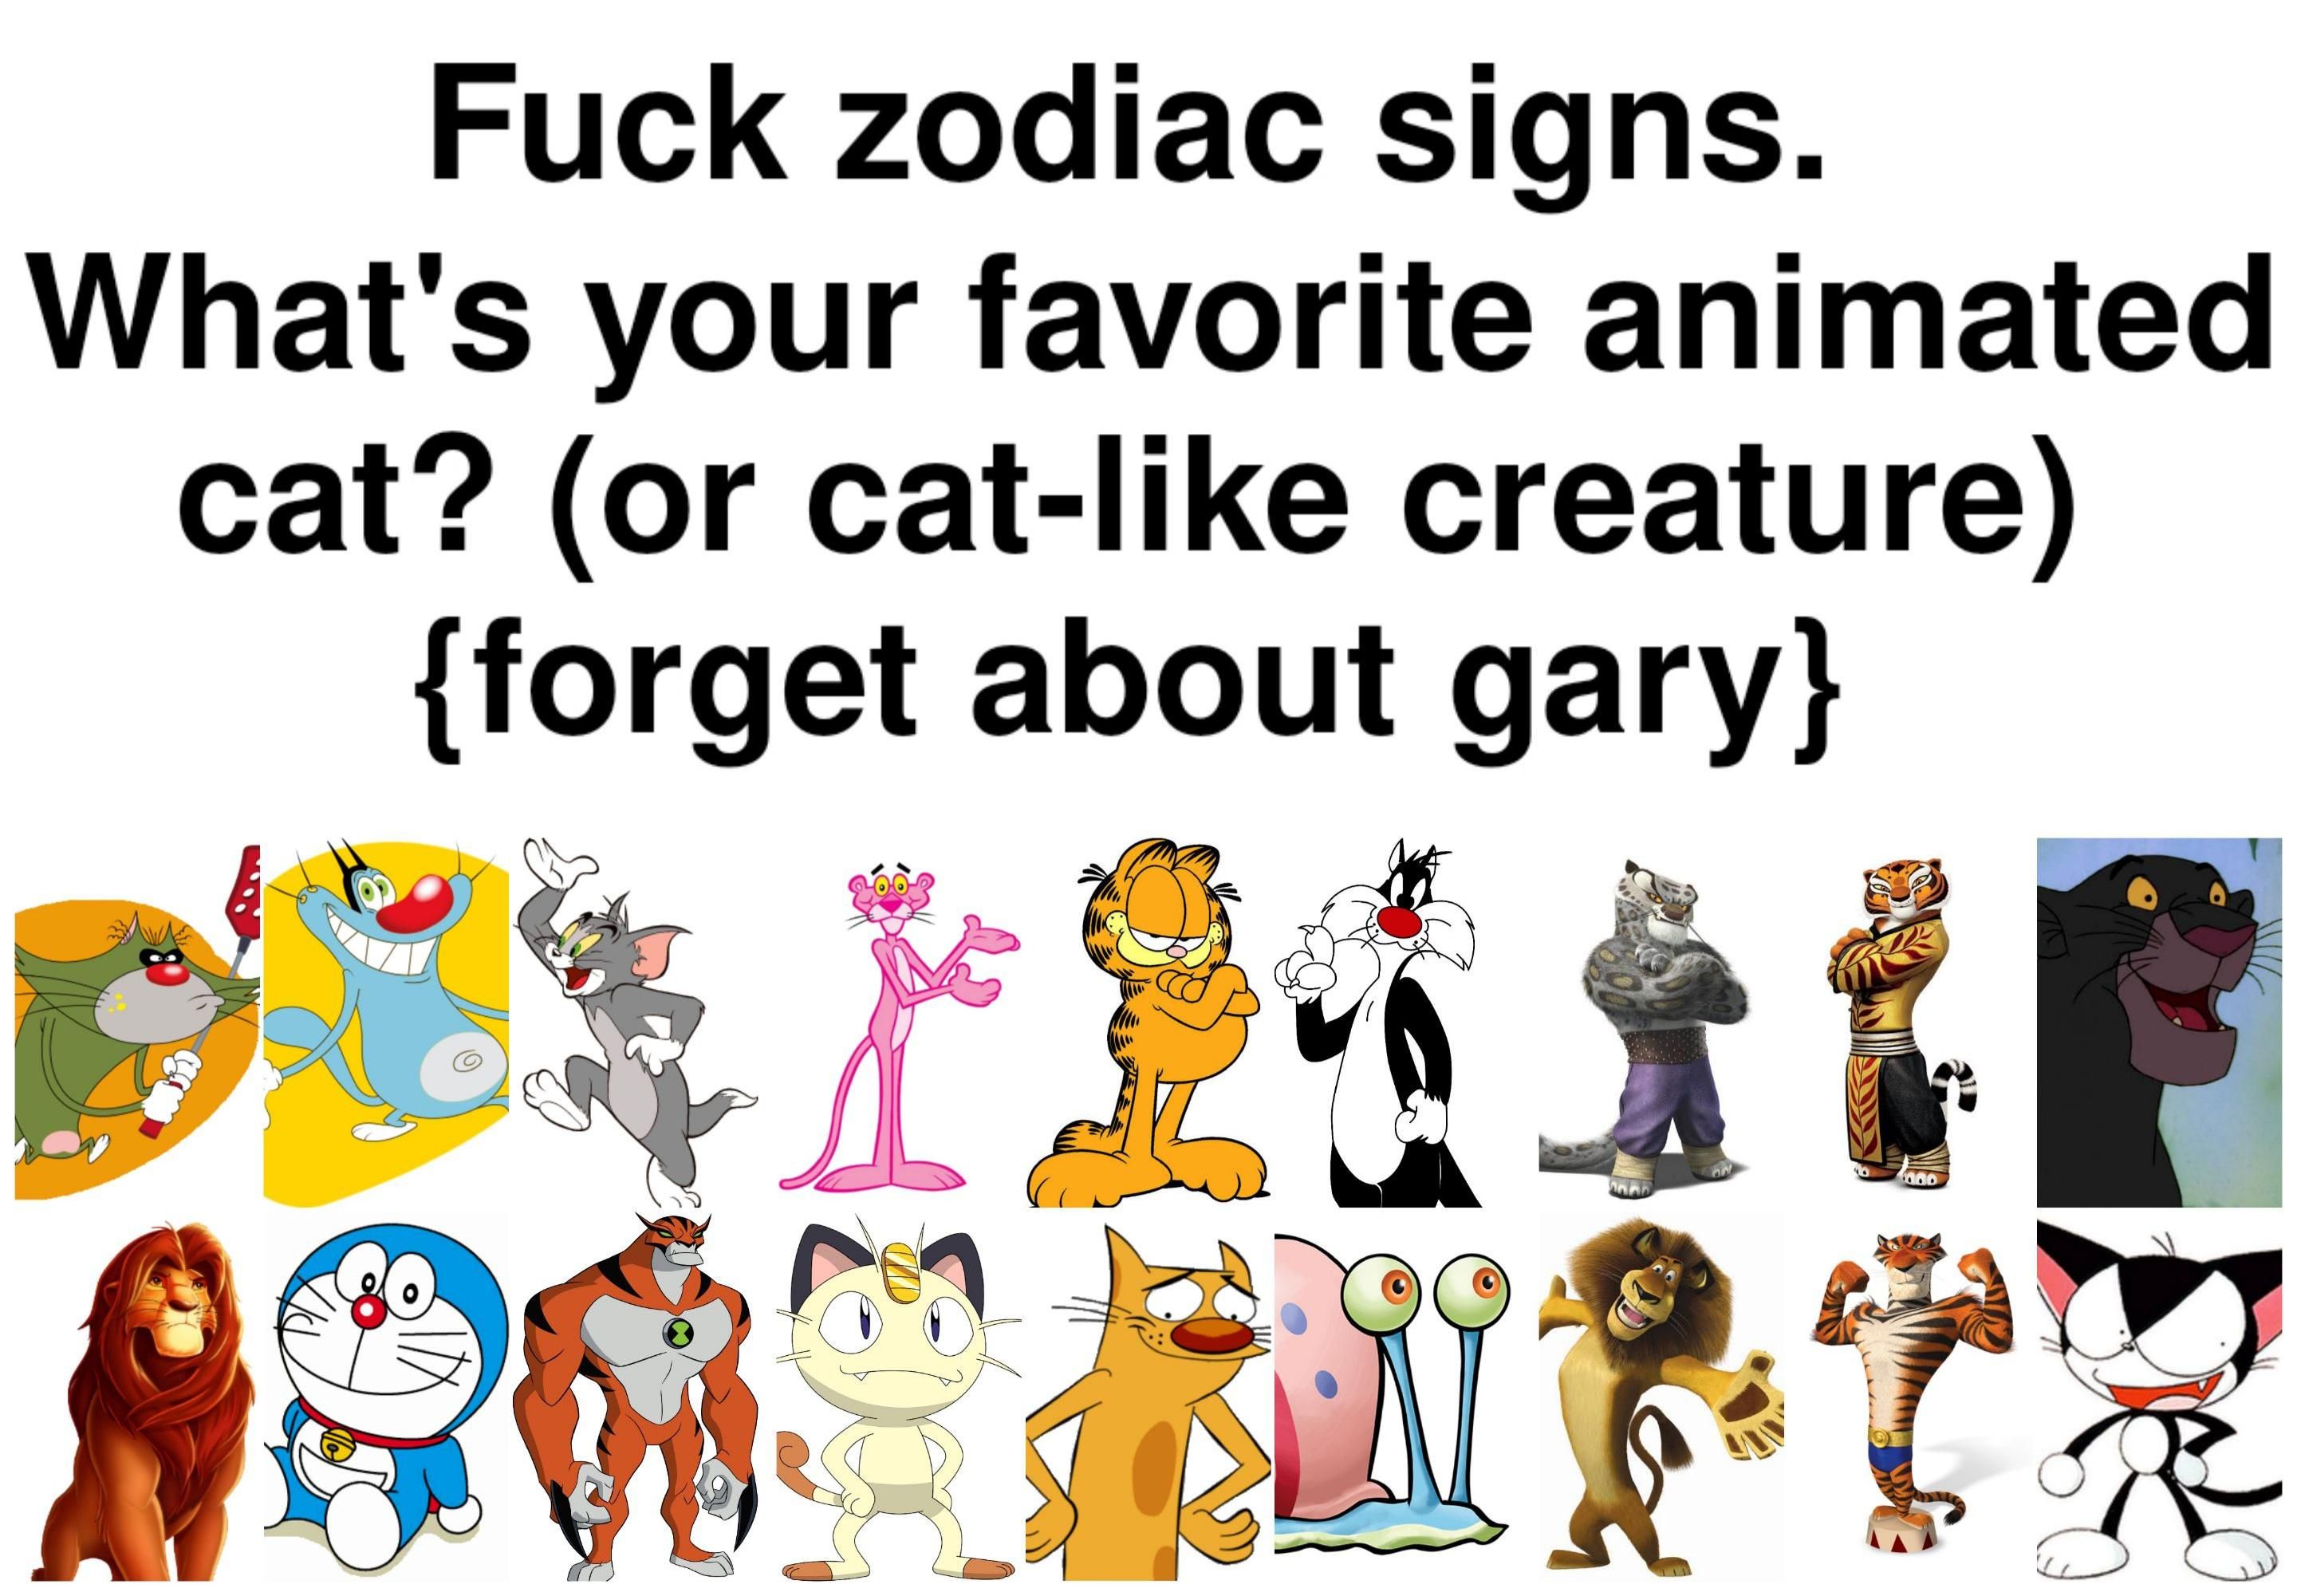 Ever thought about animated cats?